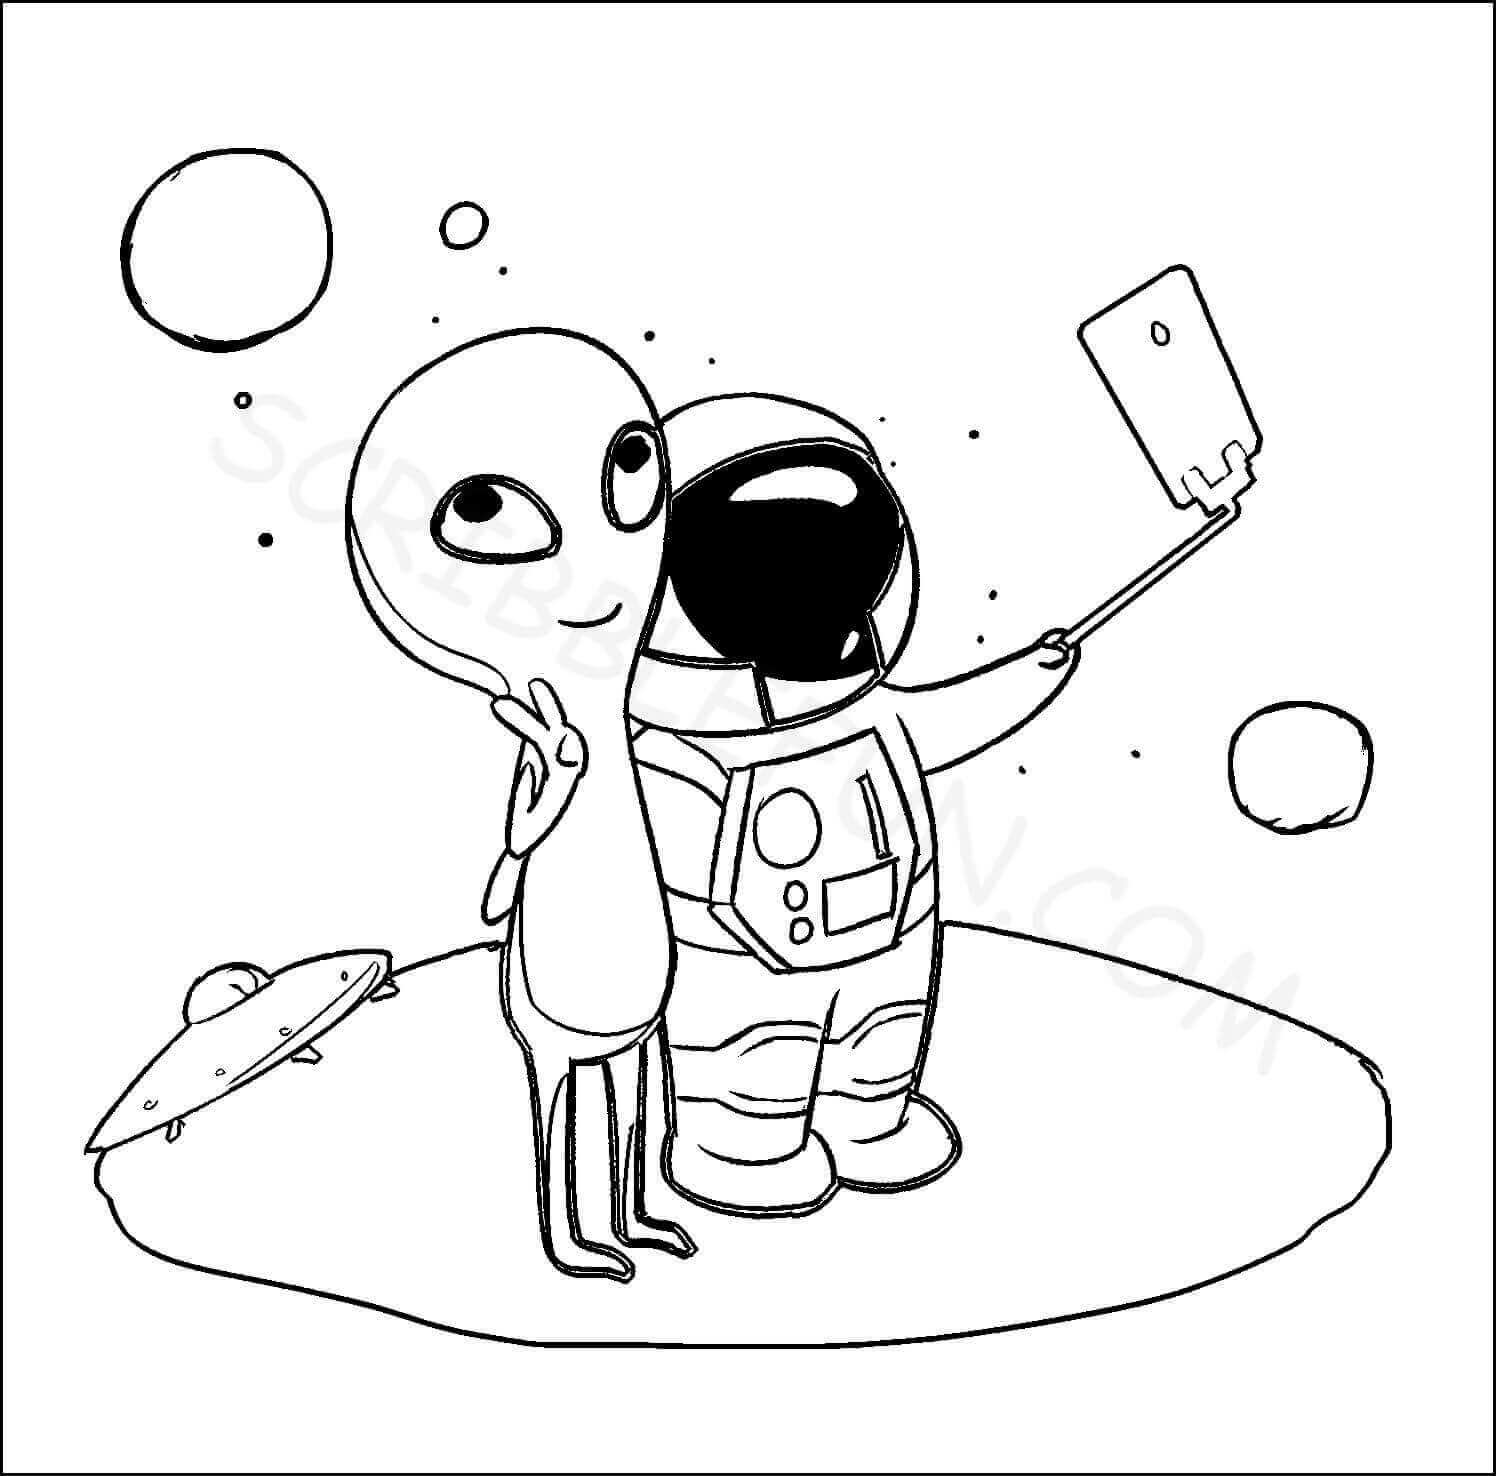 Astronaut clicking a selfie with alien